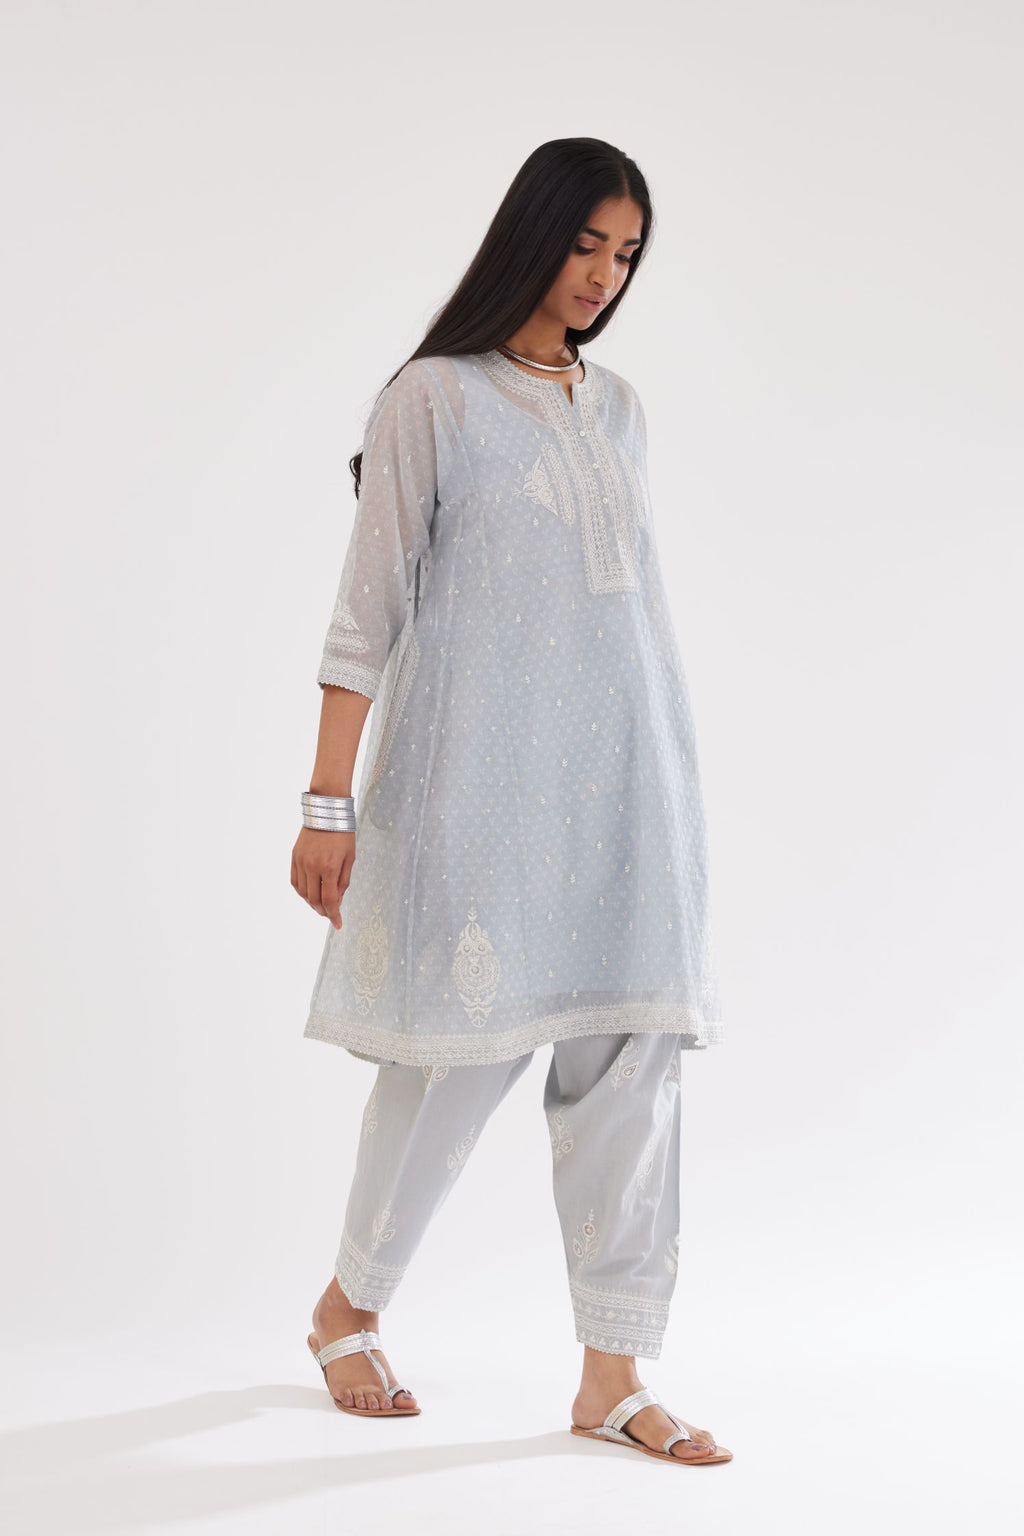 Blue cotton chanderi hand block printed short kalidar phiran style kurta set with button placket neckline and dori and silk thraed embroidery all over.